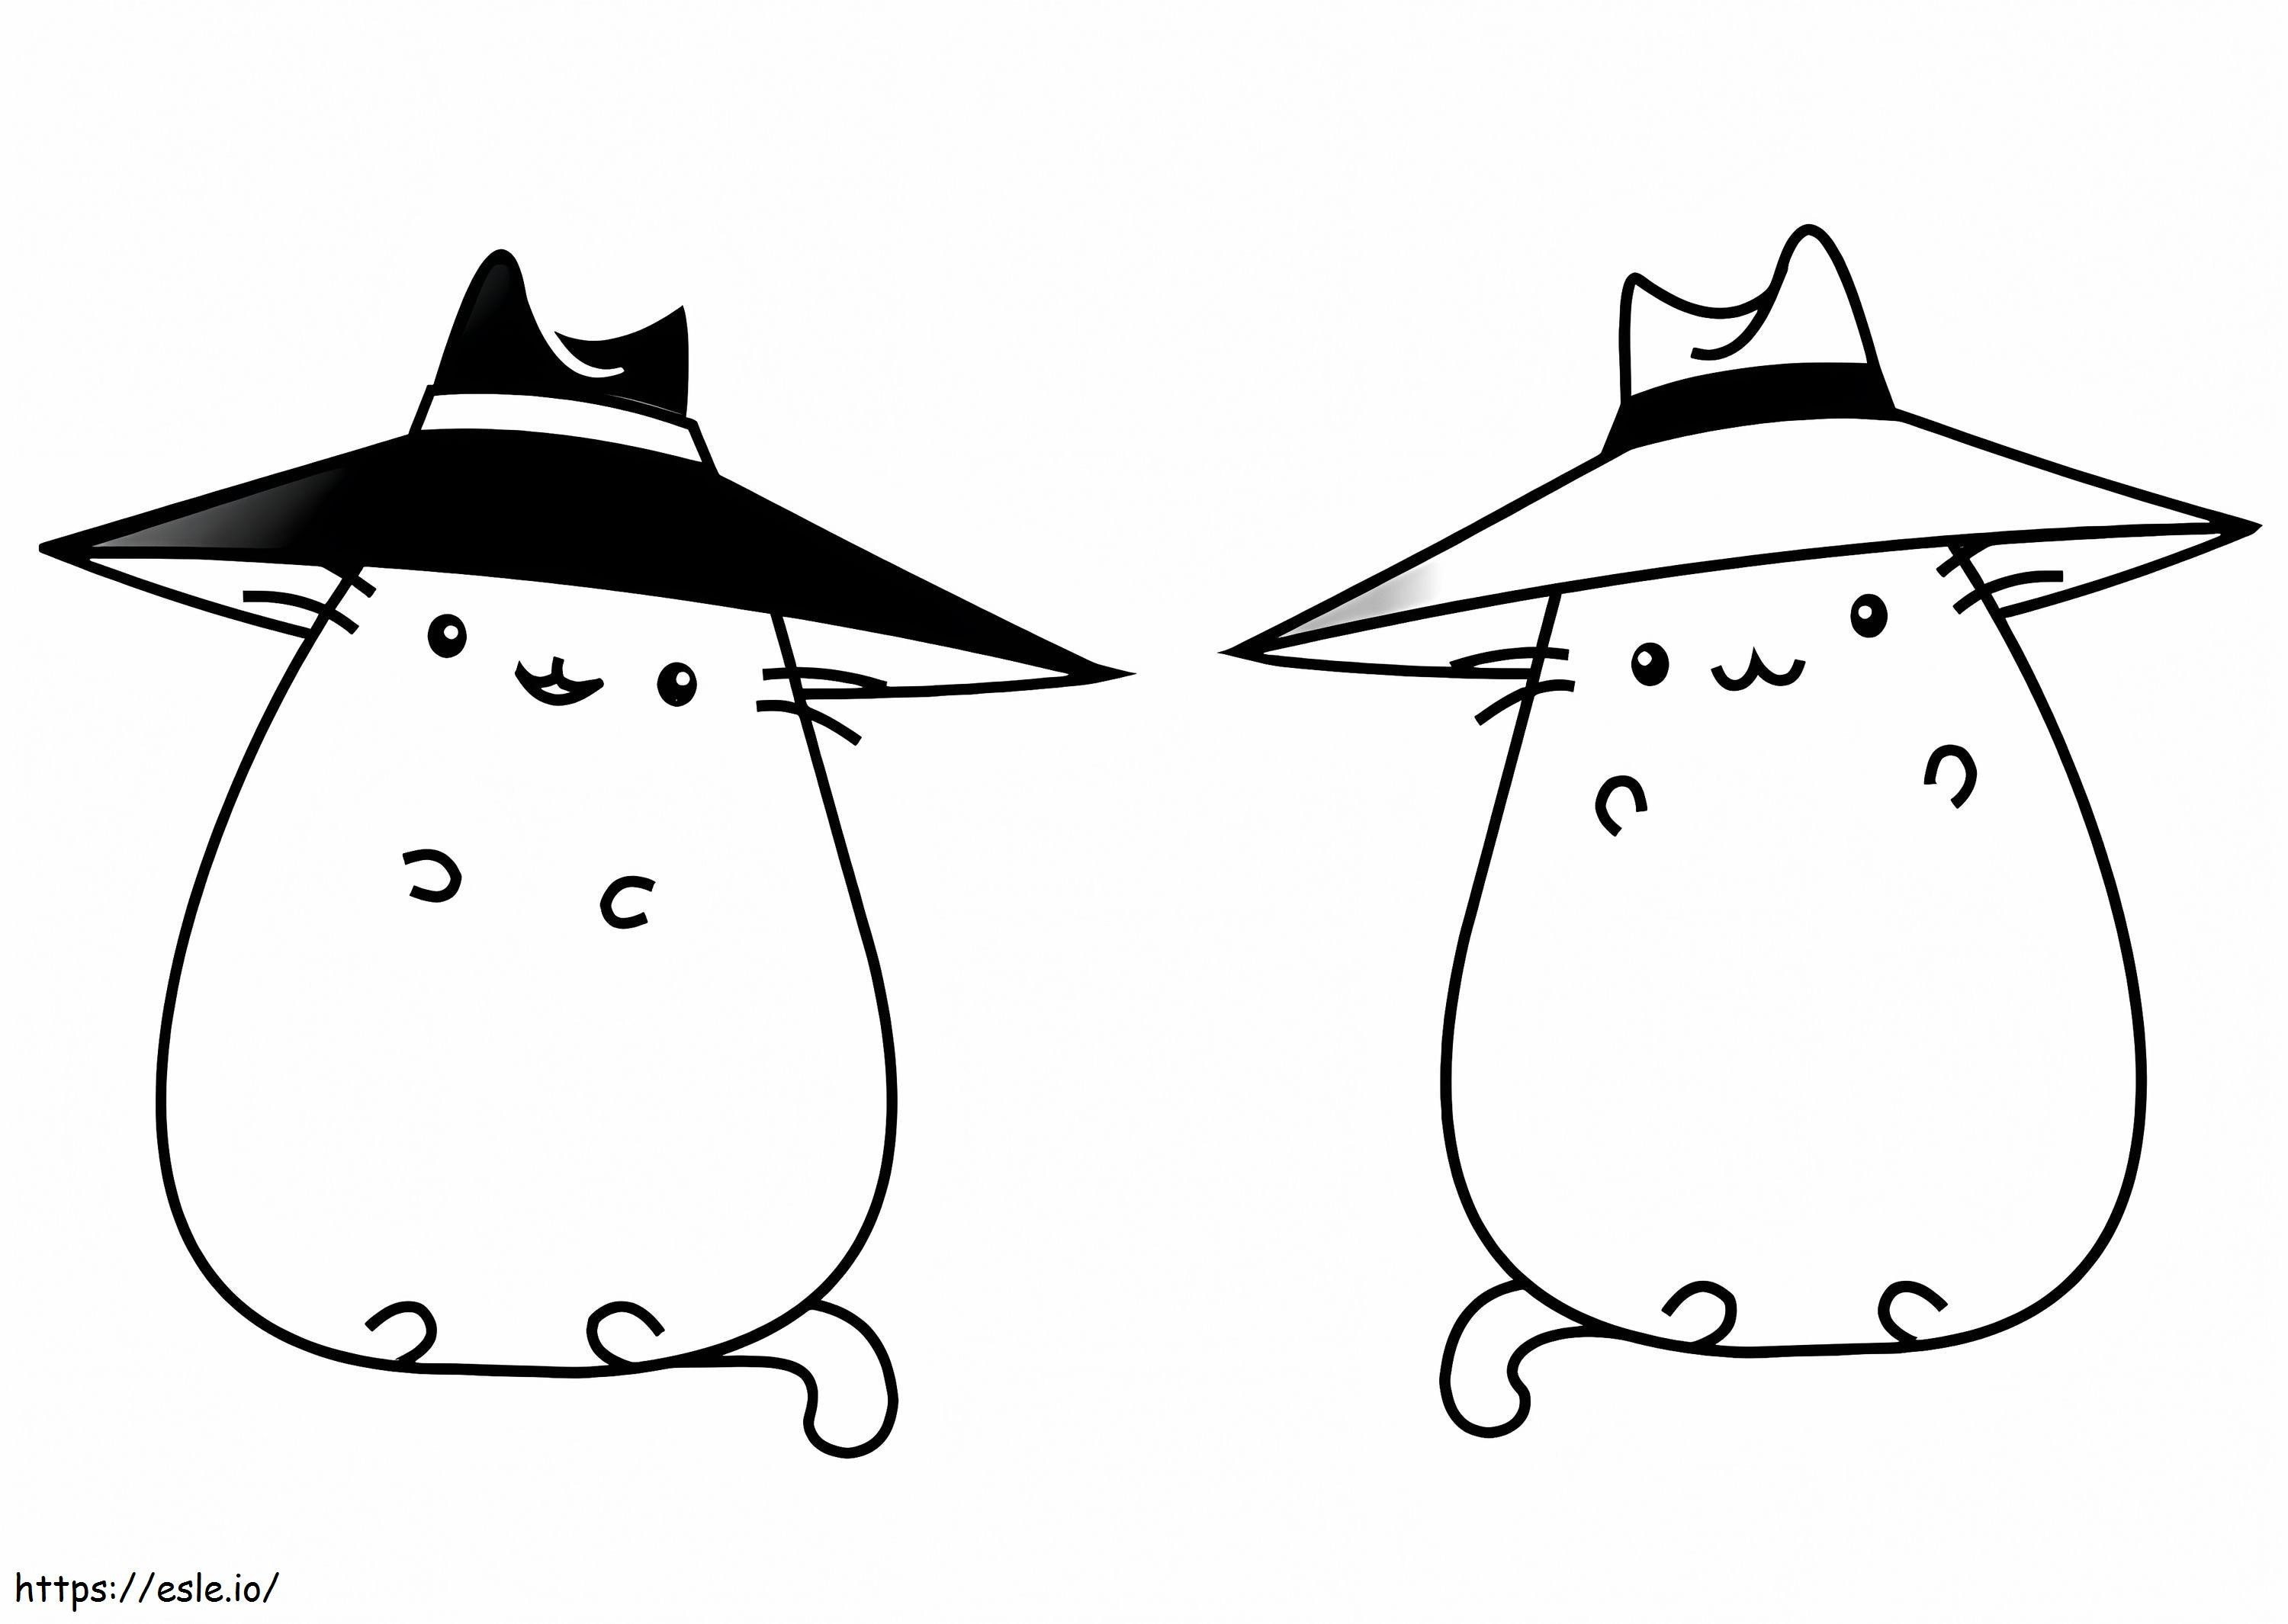 Adorable Pusheen 6 coloring page